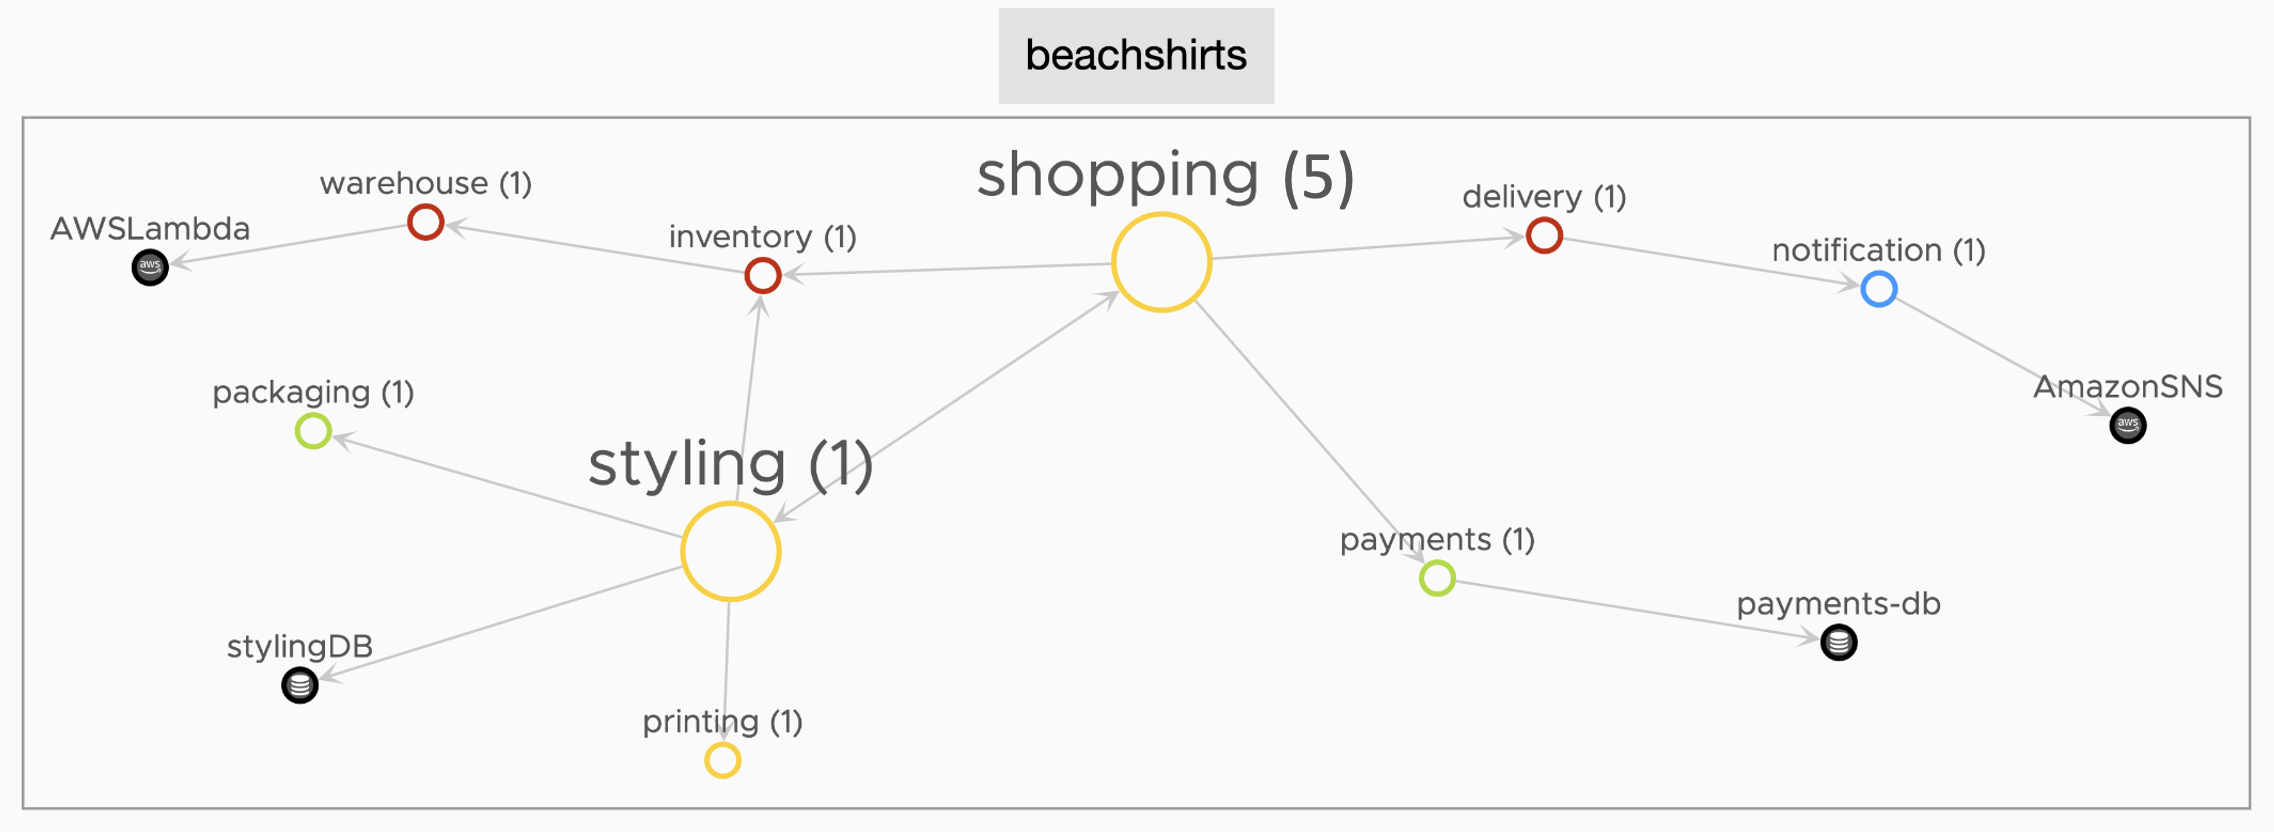 Shows there are 5 shopping services on the beachshirts application.